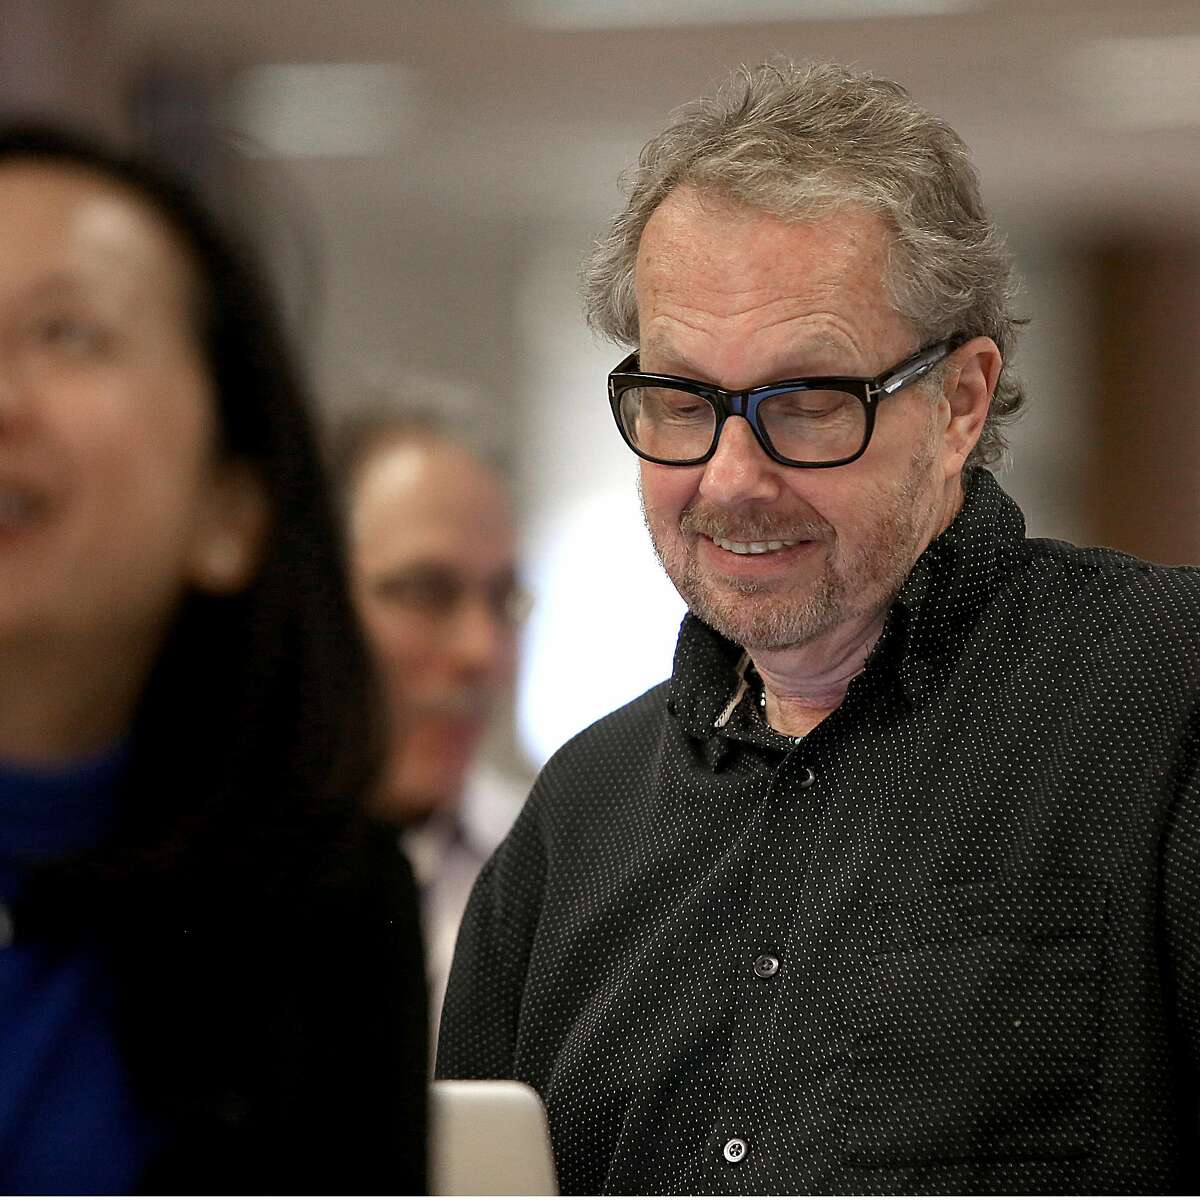 San Francisco Chronicle assistant managing editor and TV critic David Wiegand at a meeting in the newsroom in San Francisco, Calif., on Tuesday, July 14, 2015.